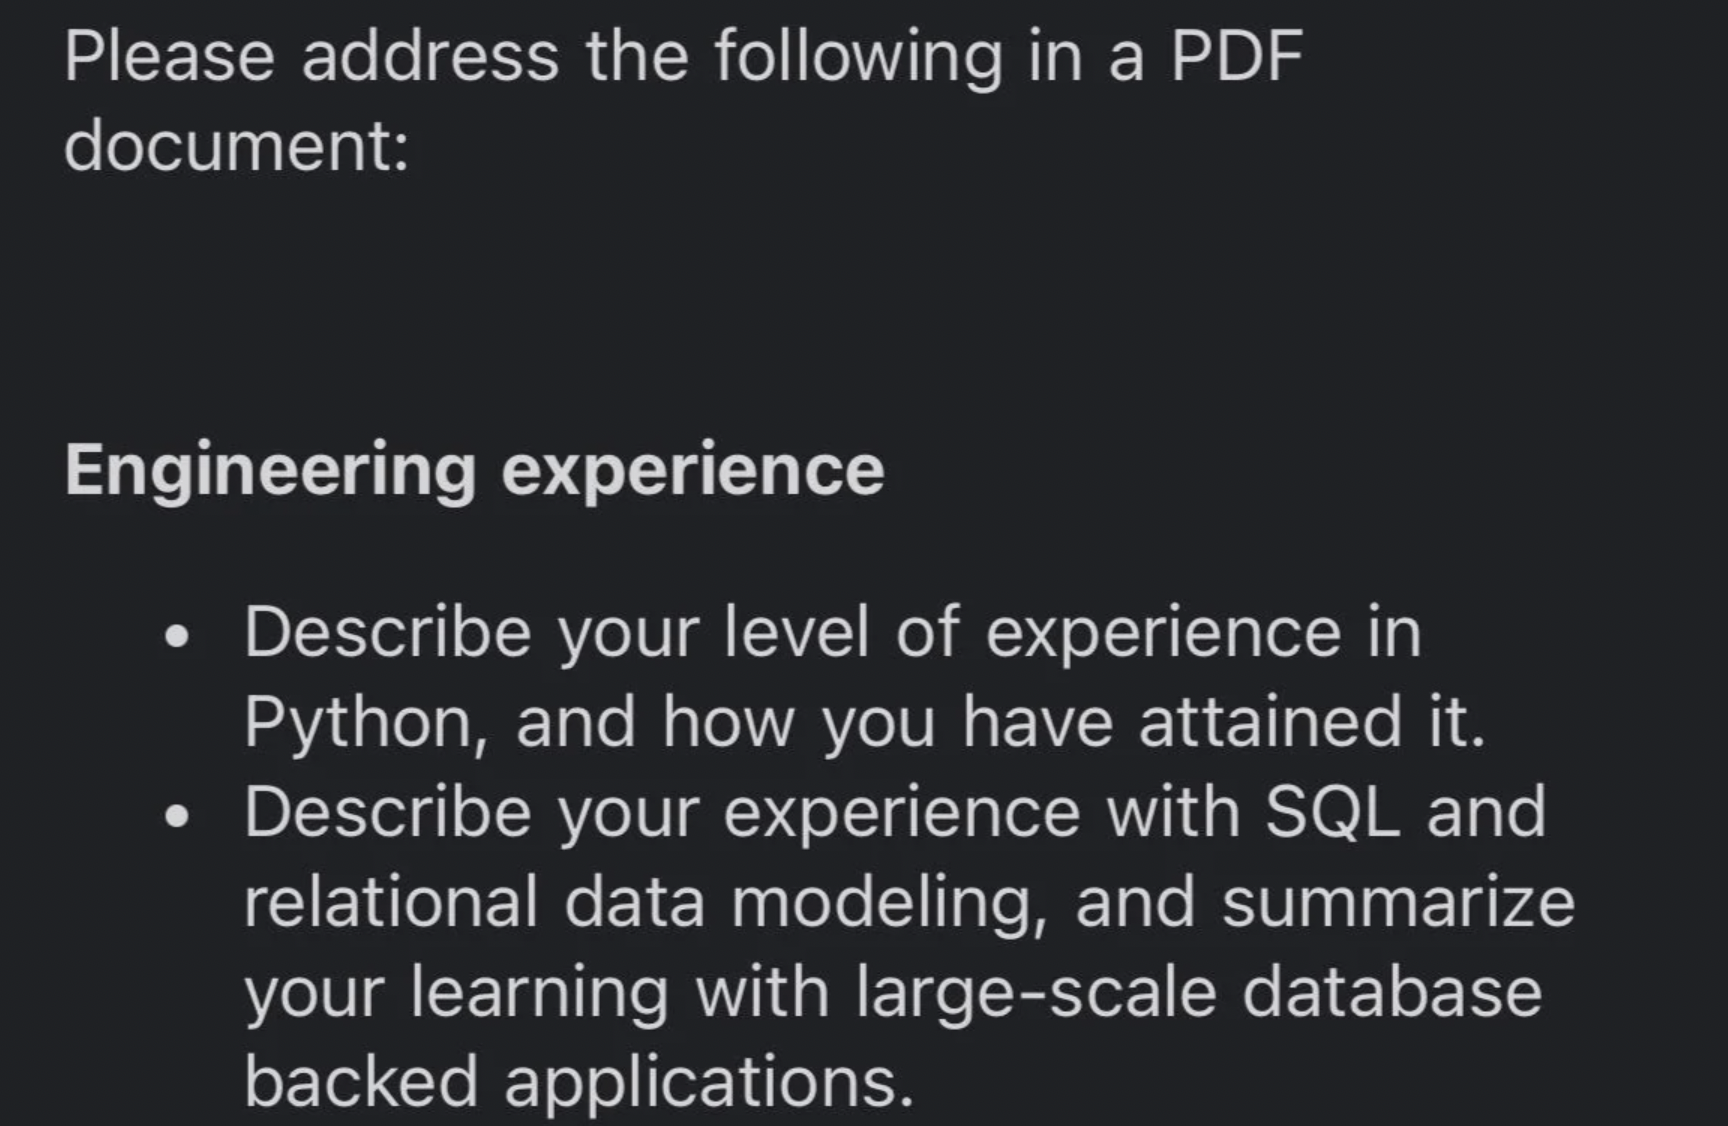 Please address the ing in a Pdf document Engineering experience Describe your level of experience in Python, and how you have attained it. Describe your experience with Sql and relational data modeling, and summarize your learning with largescale database